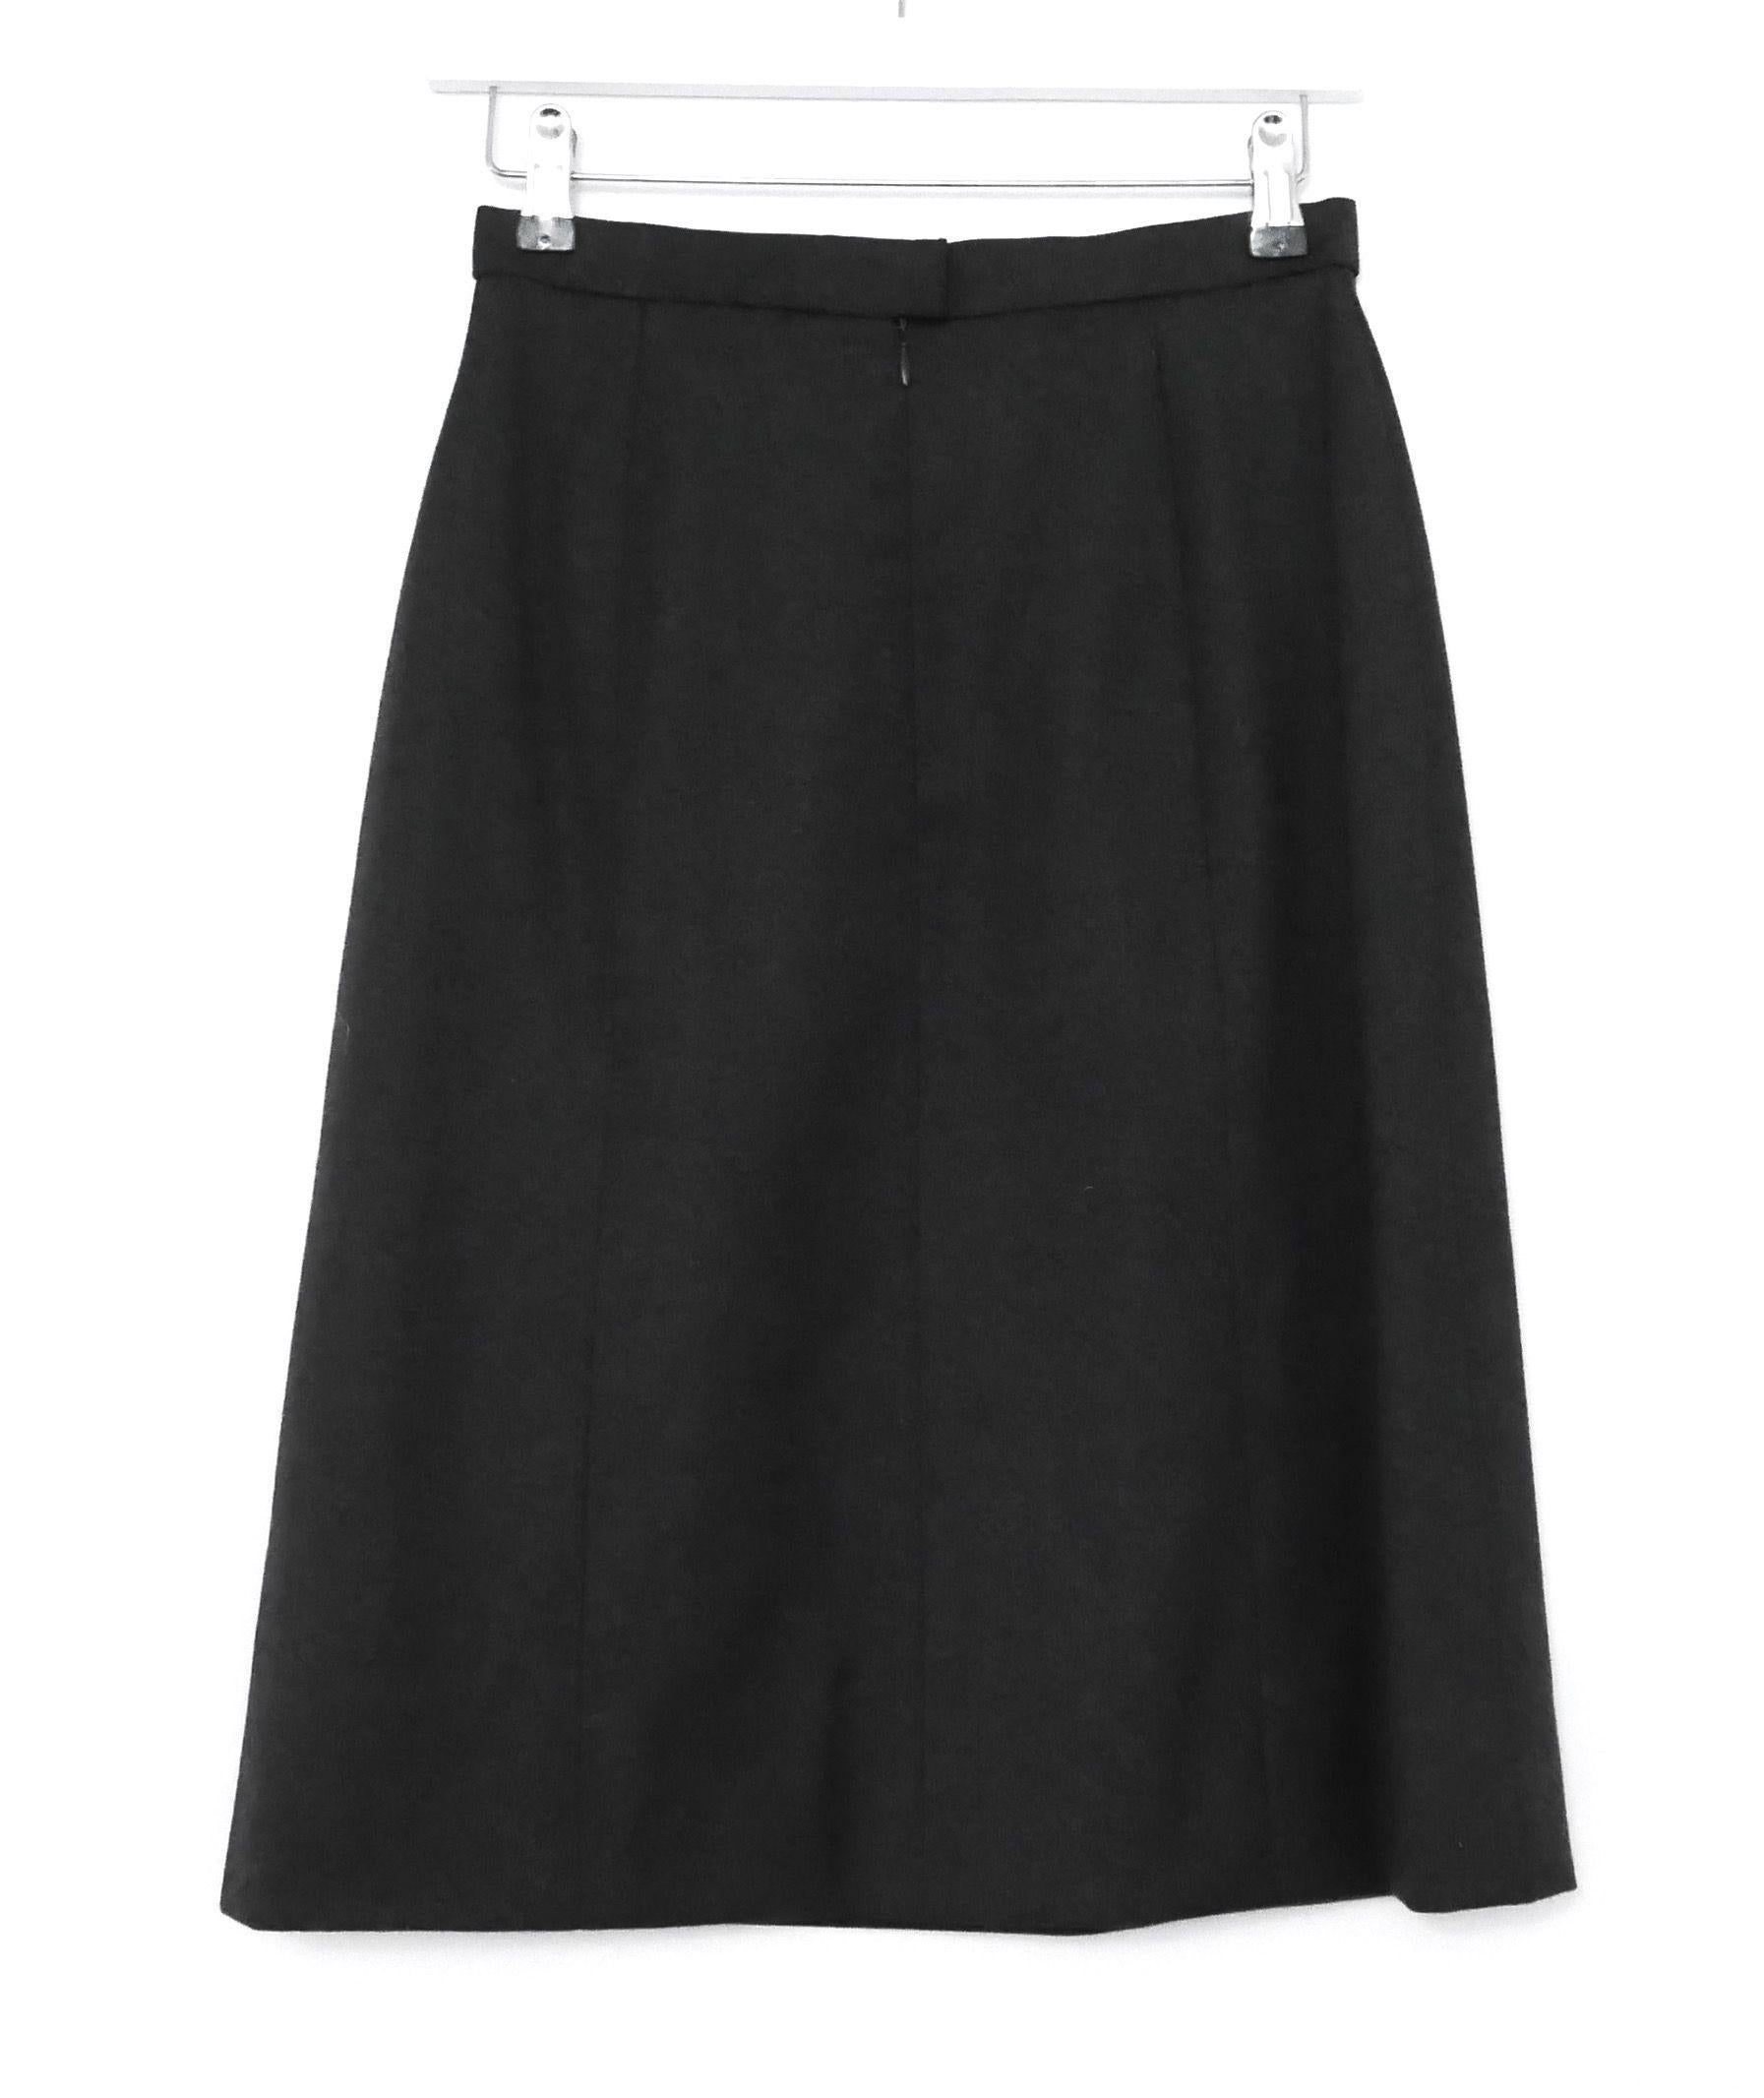 Classic, timeless skirt from the Chanel Fall 1996 Collection. Worn just once and then carefully stored. Made from fine, dark grey wool flannel, it has a classic pencil cut with vertical panels, CC embossed full silk lining and concealed back zip.